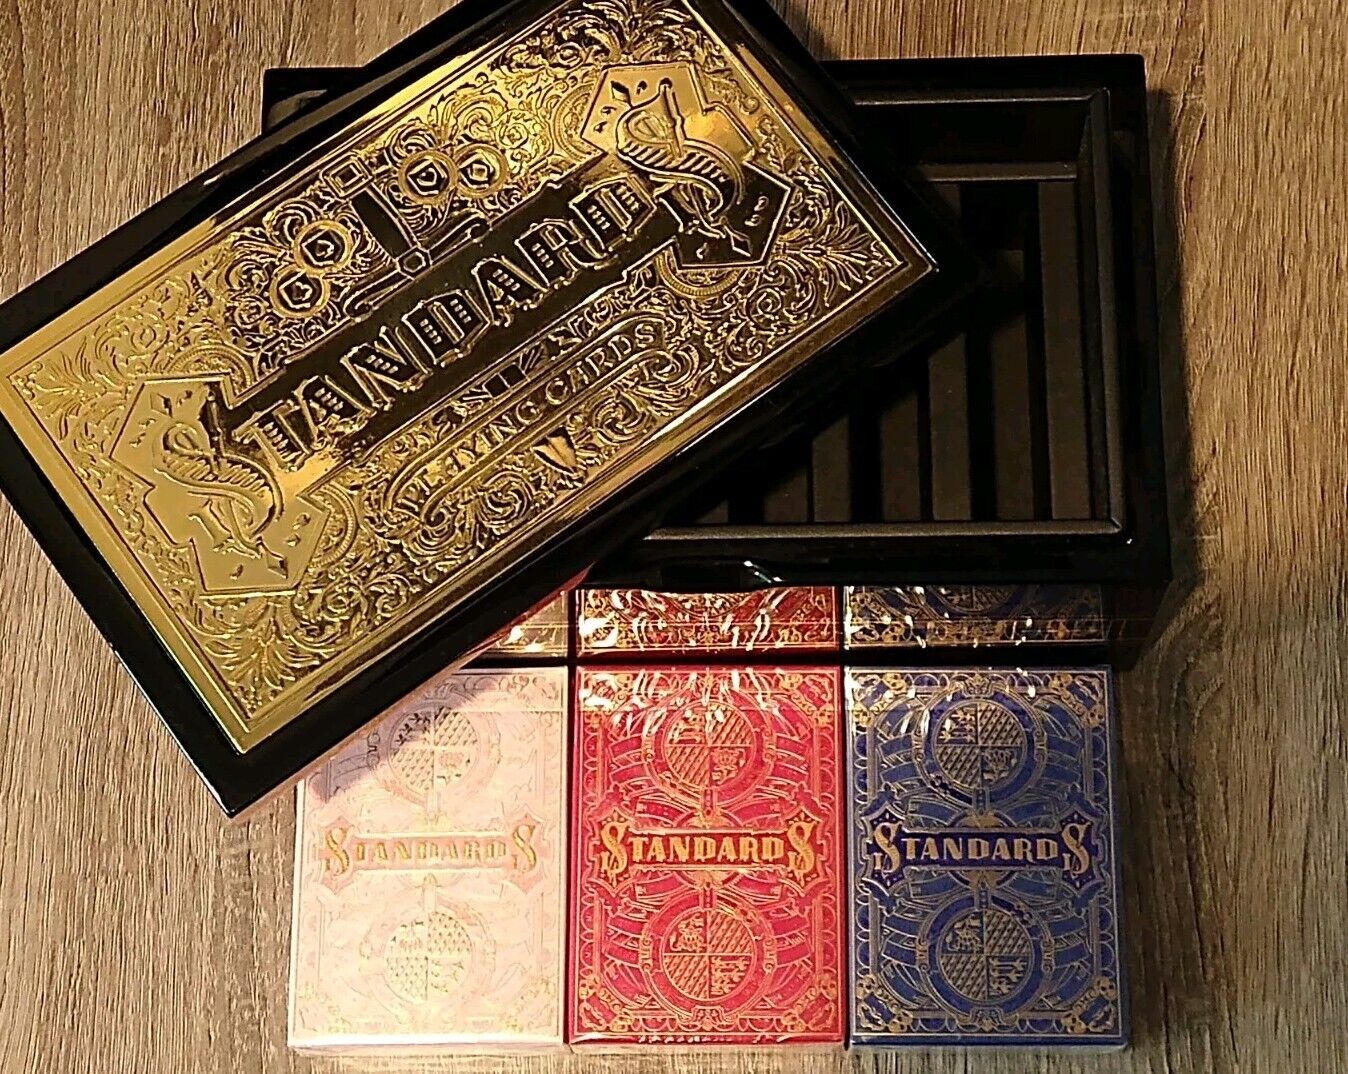 Rare Standards Laquered Wooden Box + 3 New Playing Card Decks by Art Of Play  